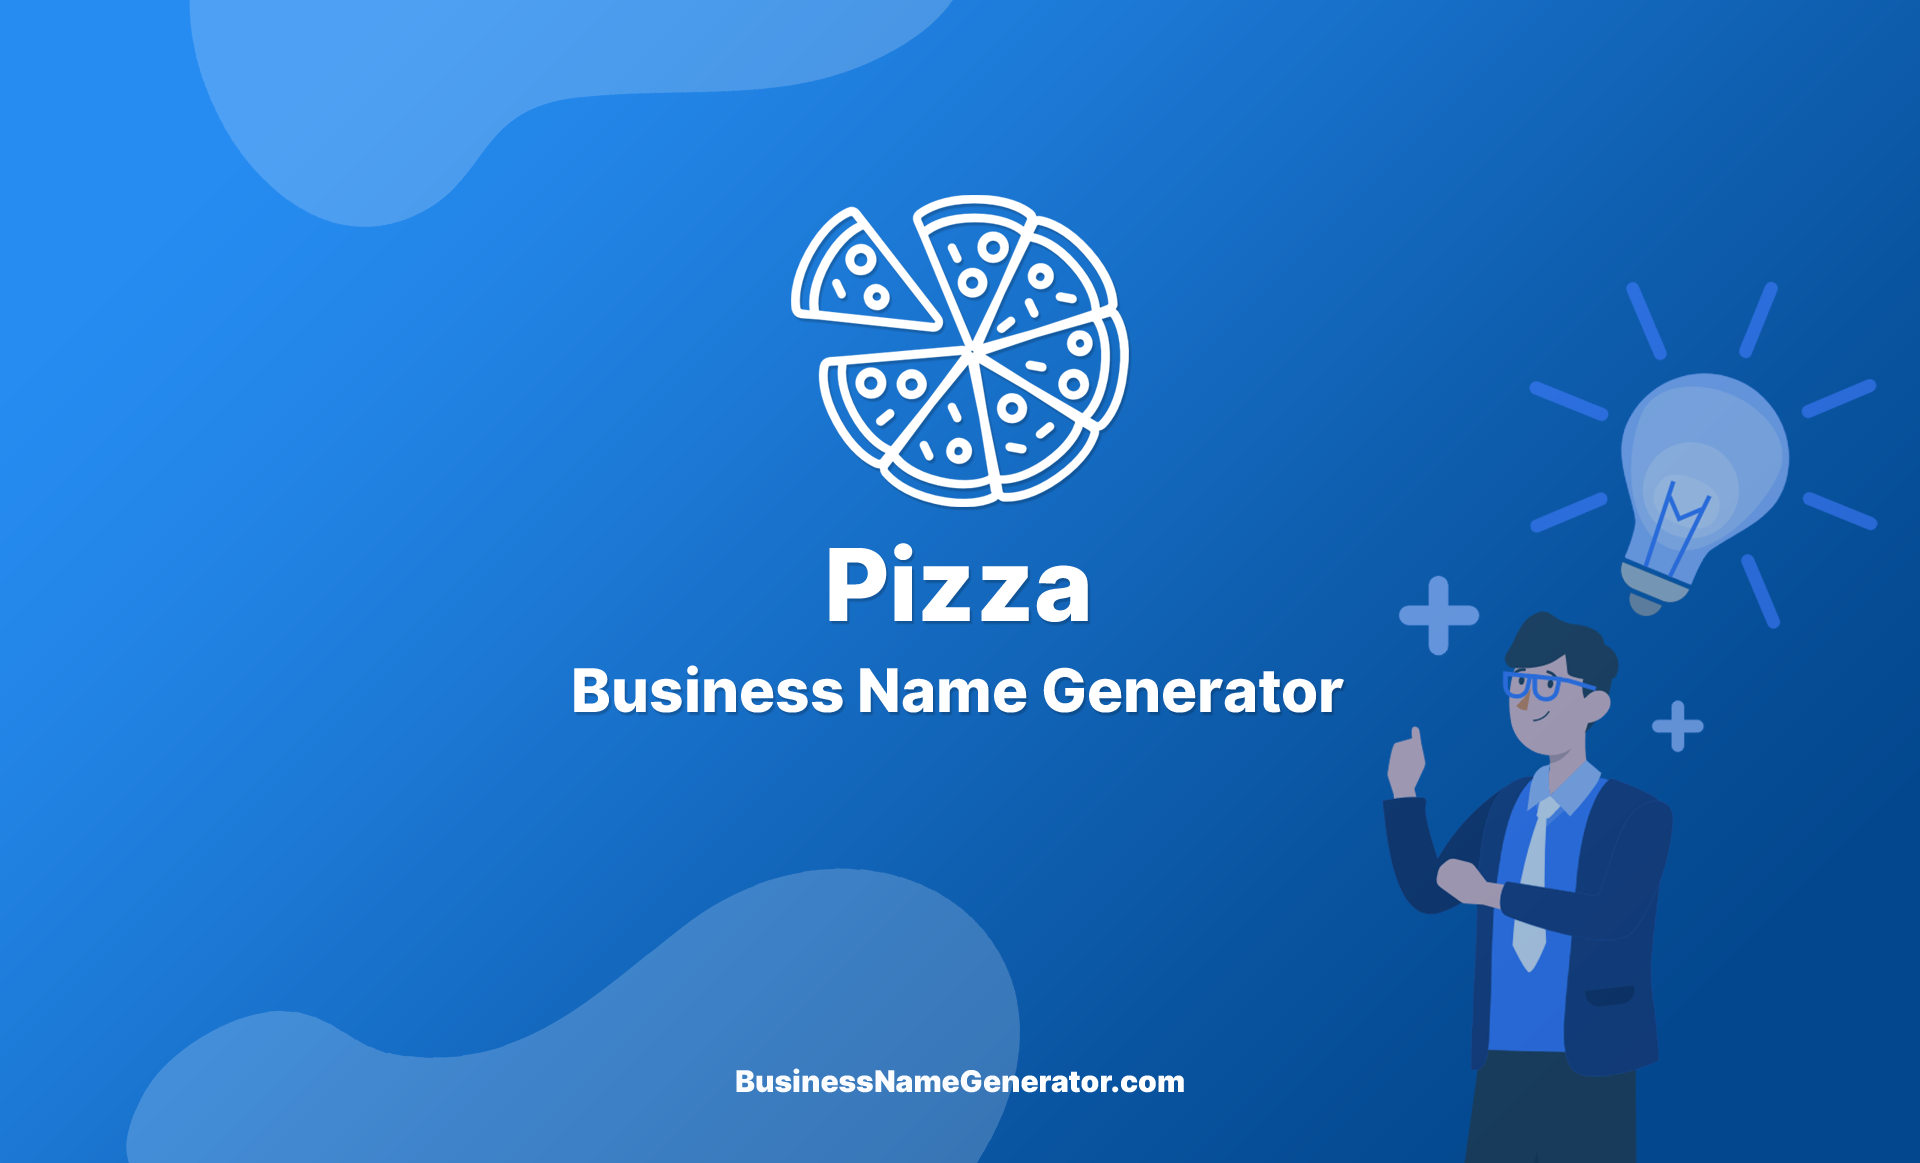 Pizza Business Name Generator Guide & Ideas